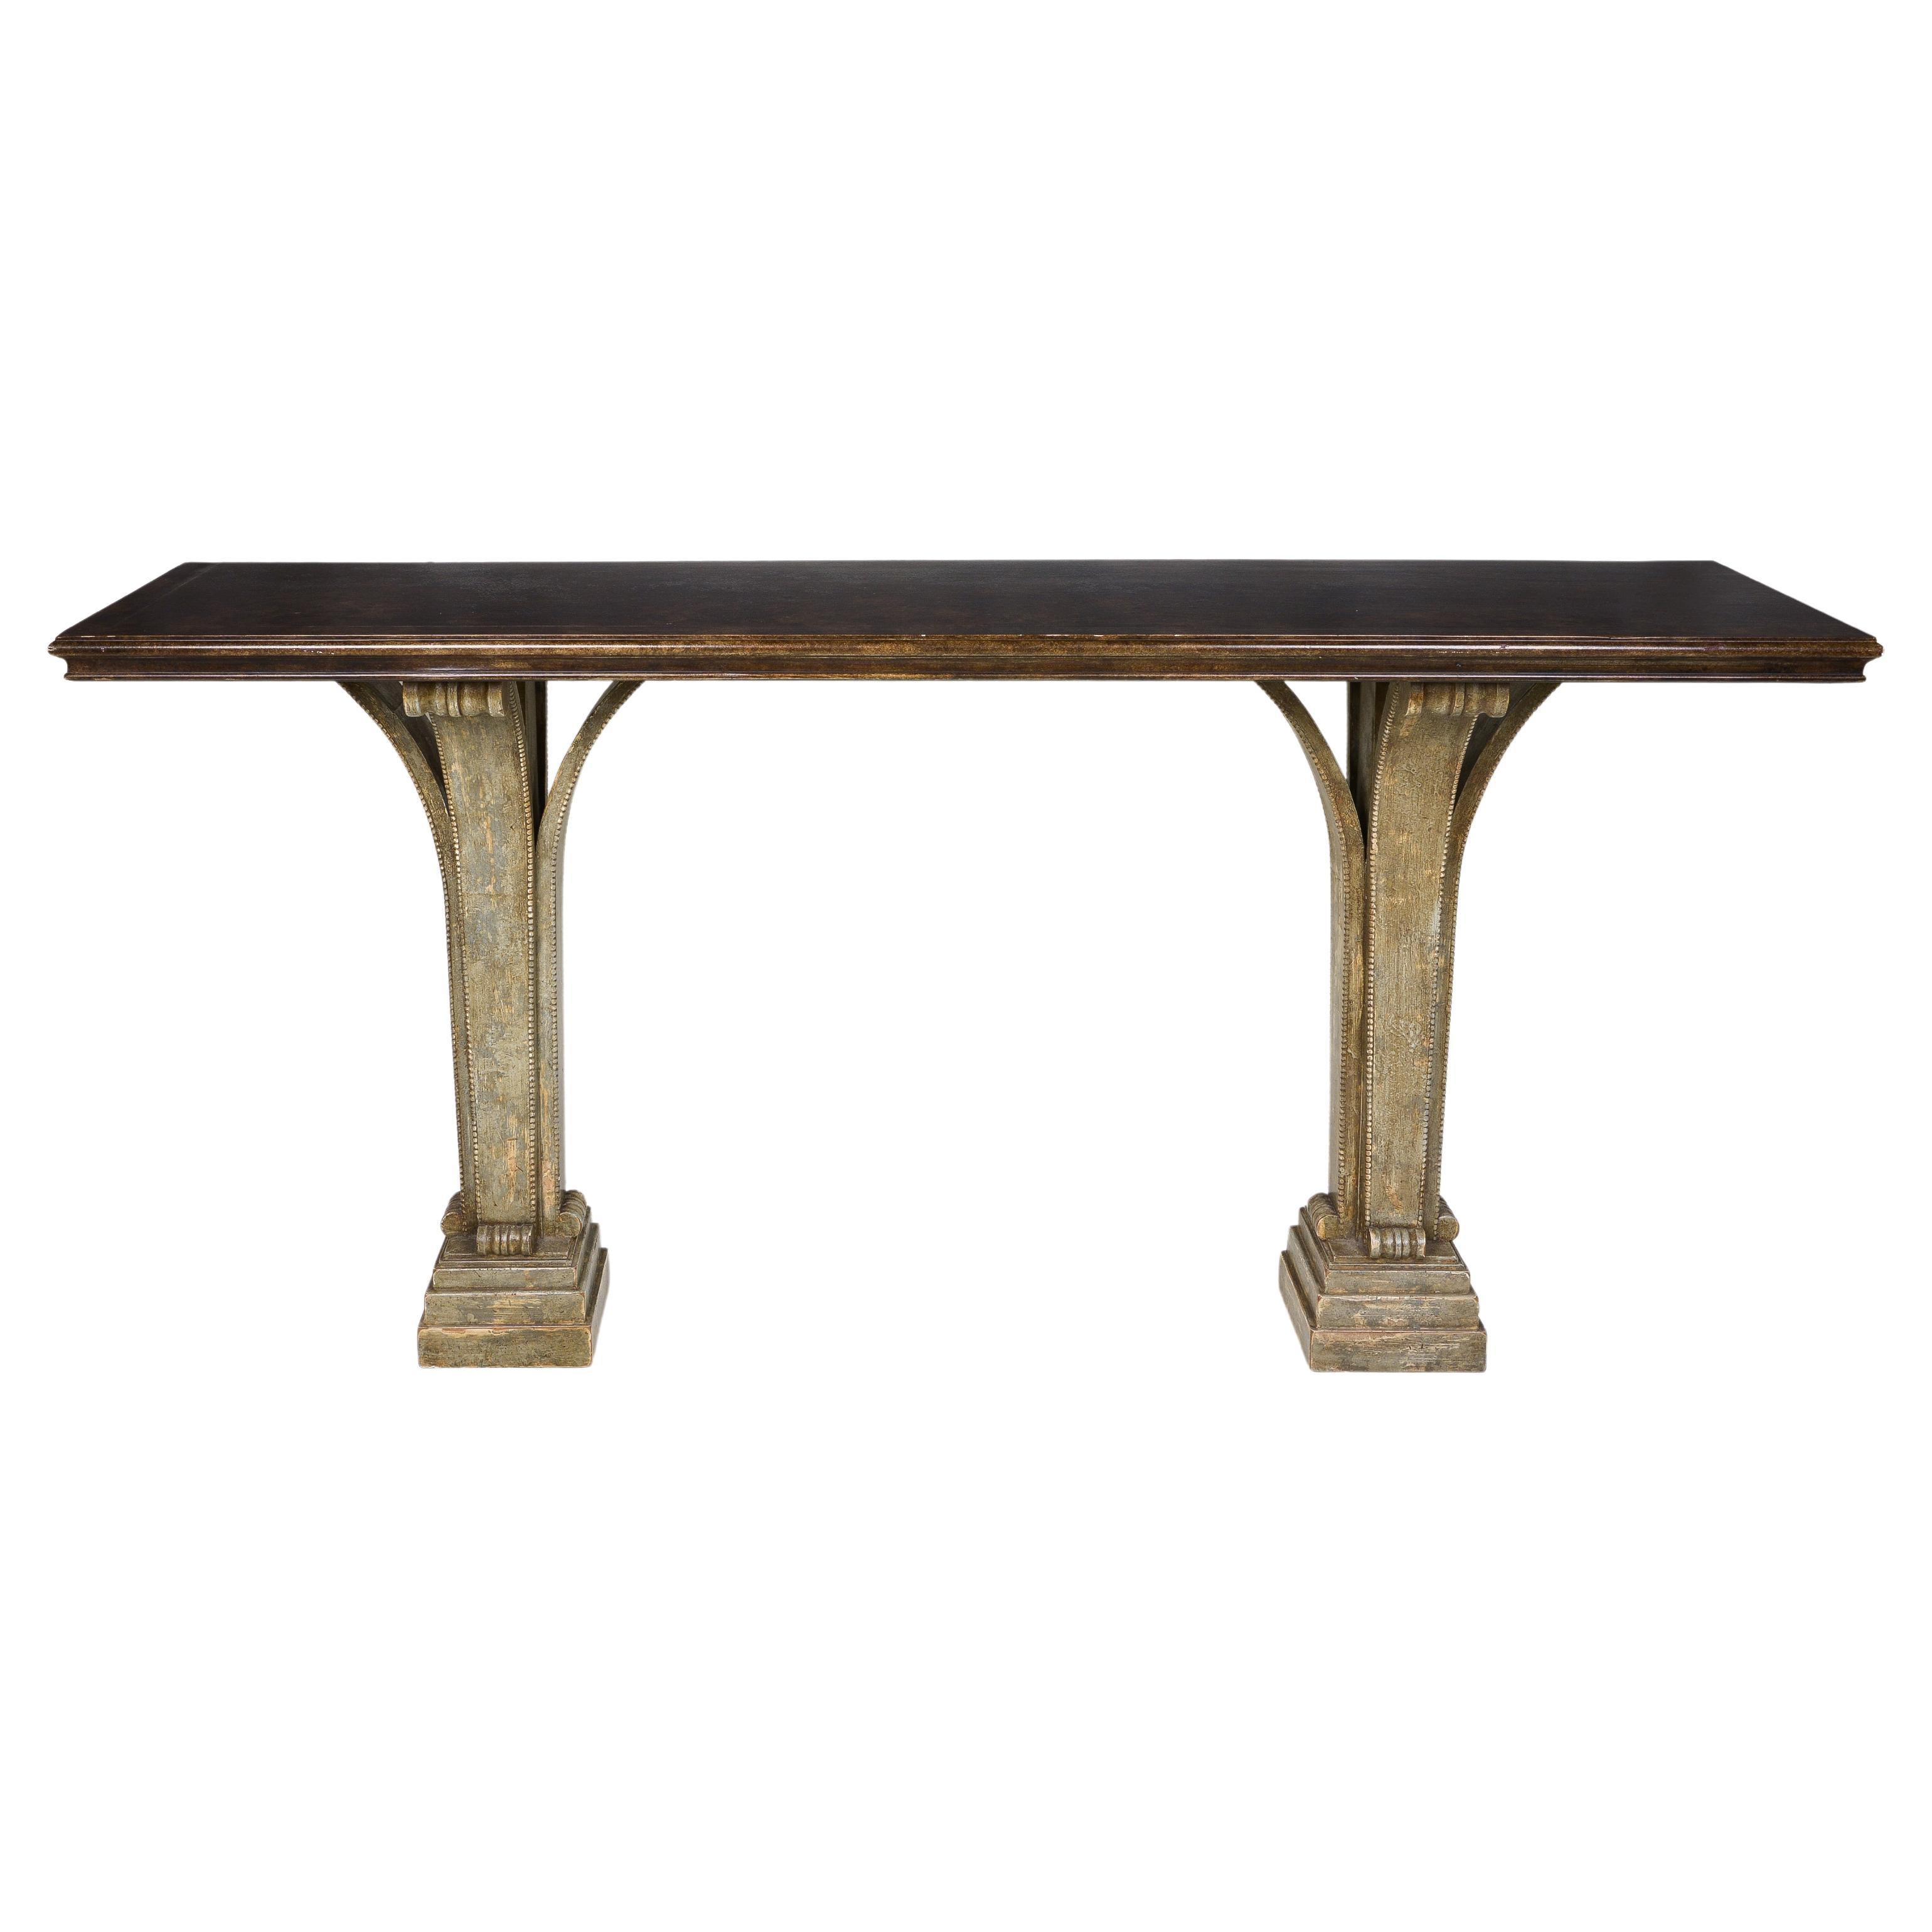 The rectangular top with cavetto molded edge faux painted to evoke stone; rained standing on two square pedestals formed by three outward scrolling supports with beaded trim, on stepped plinths.